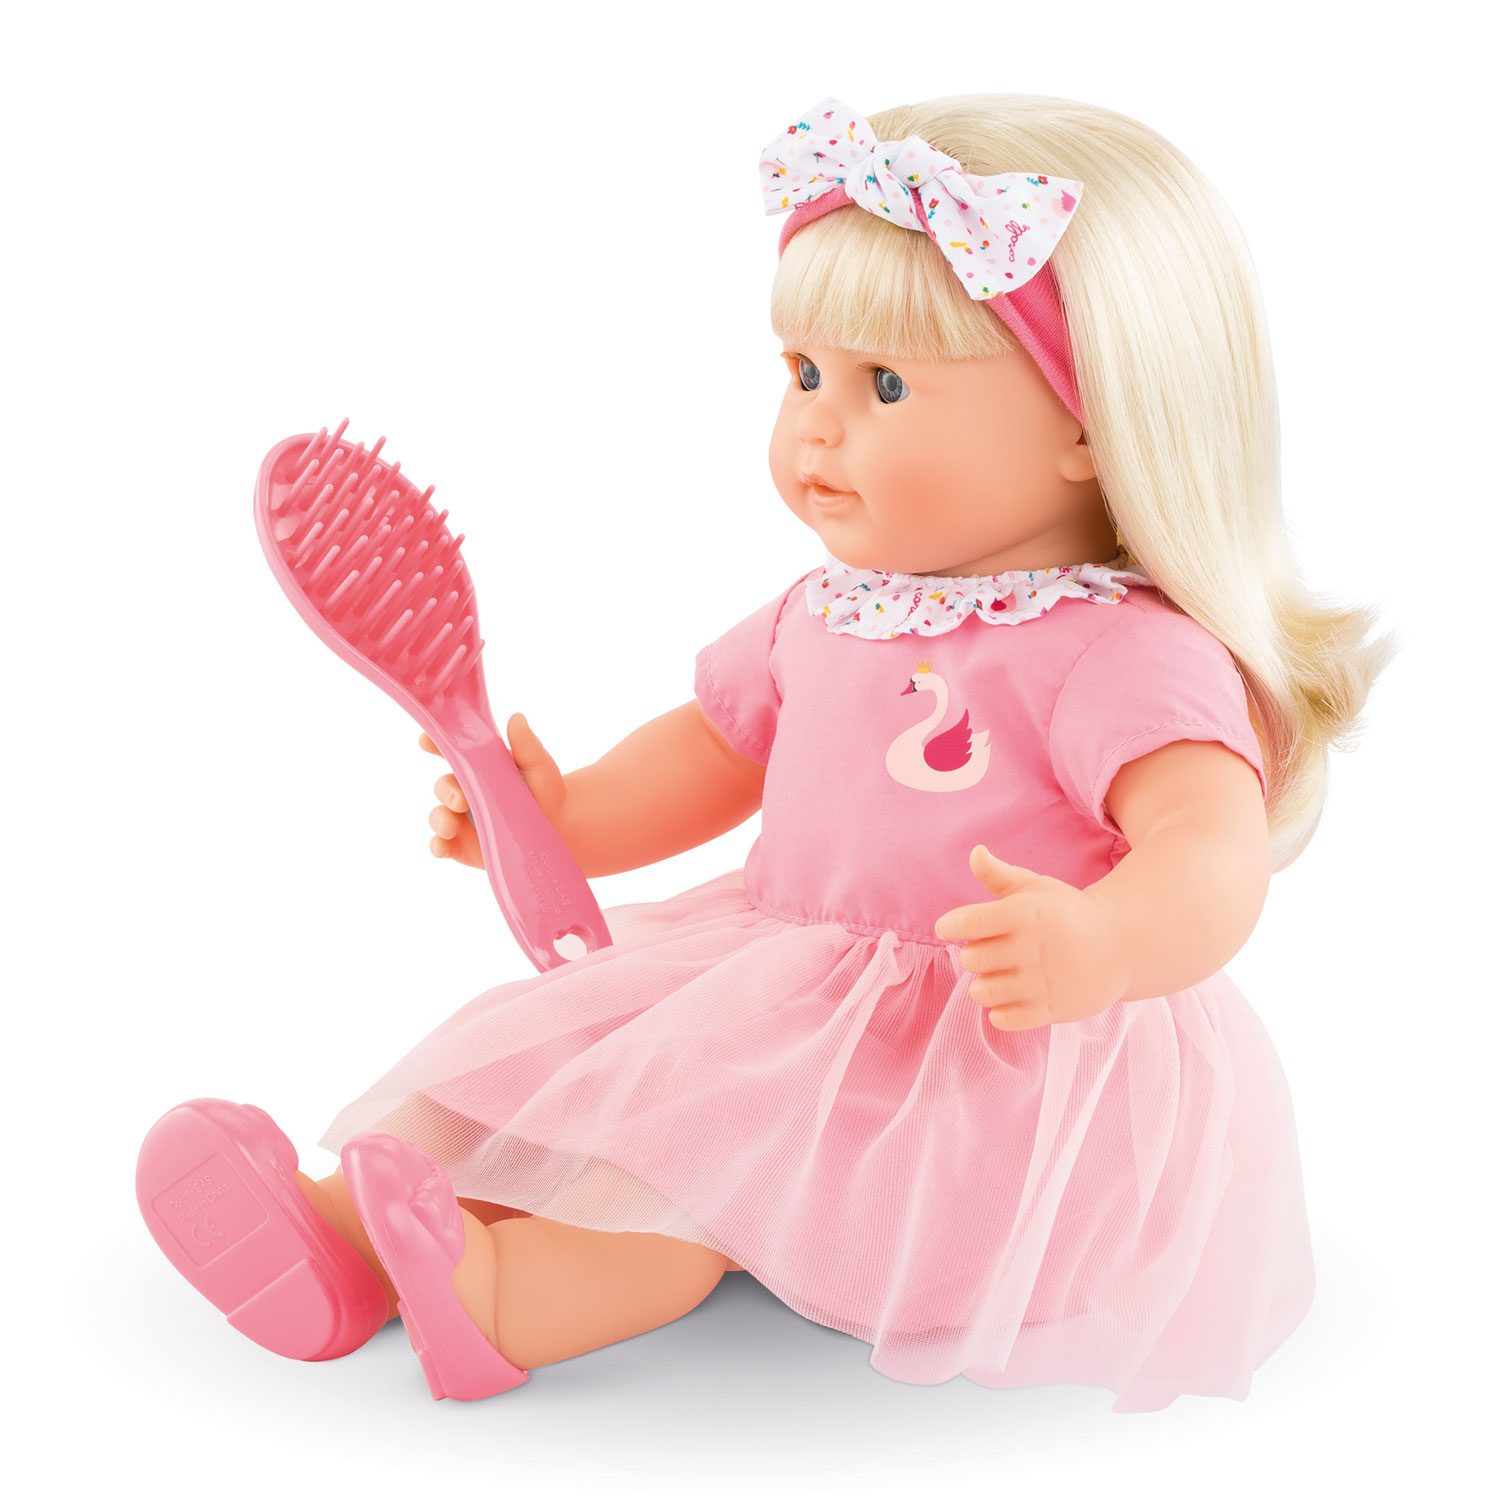 Corolle Mon Grand Poupon Baby Doll with Hair - Adele, 36cm